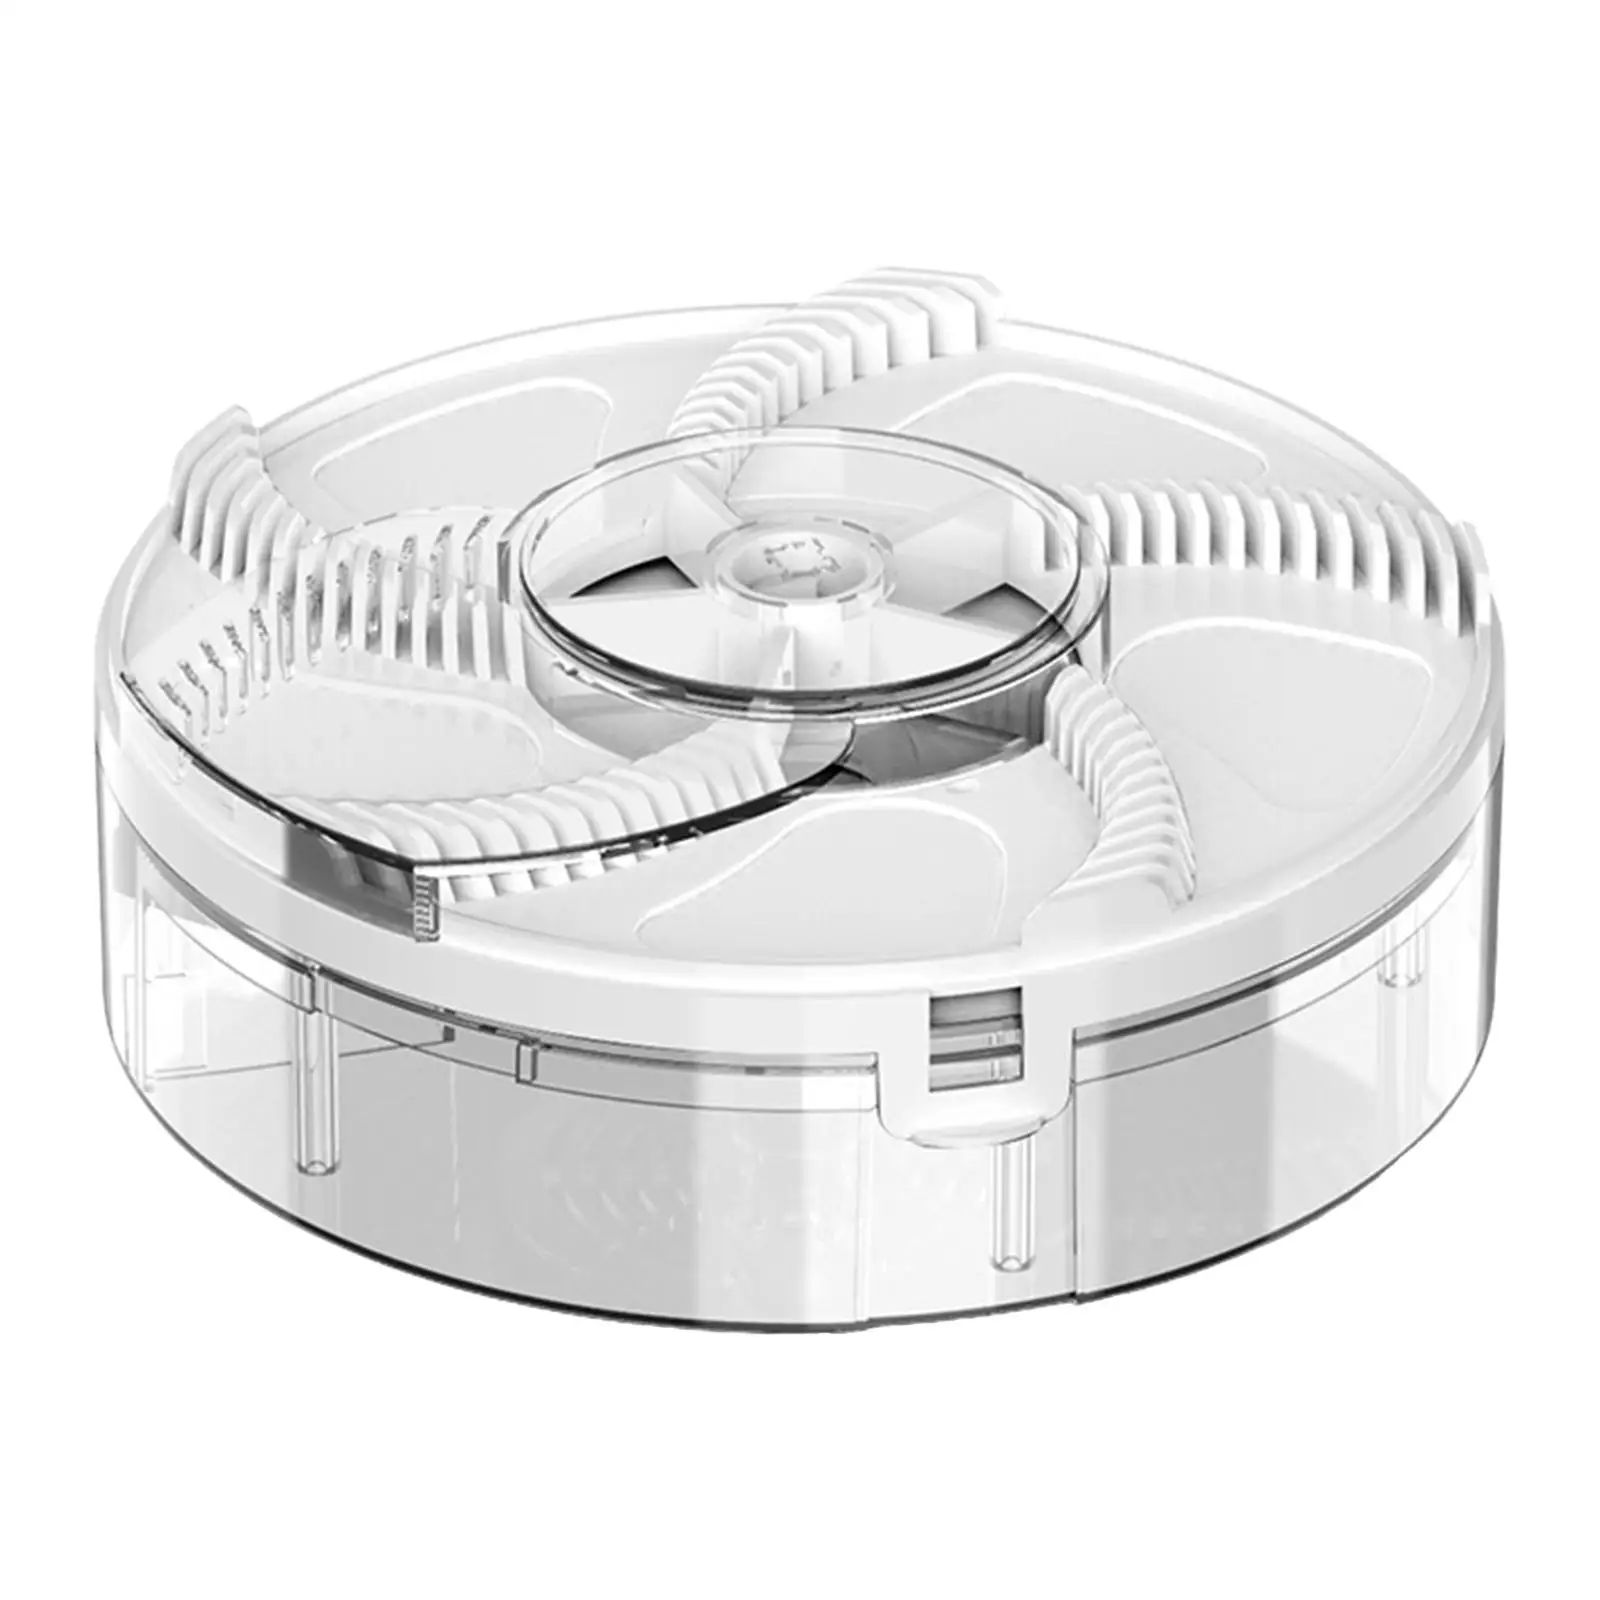 Electric Rotating Fly Trap USB Charging Turntable 1200mAh Battery Detachable Tray for Home Kitchens Fly Swatter ABS Material